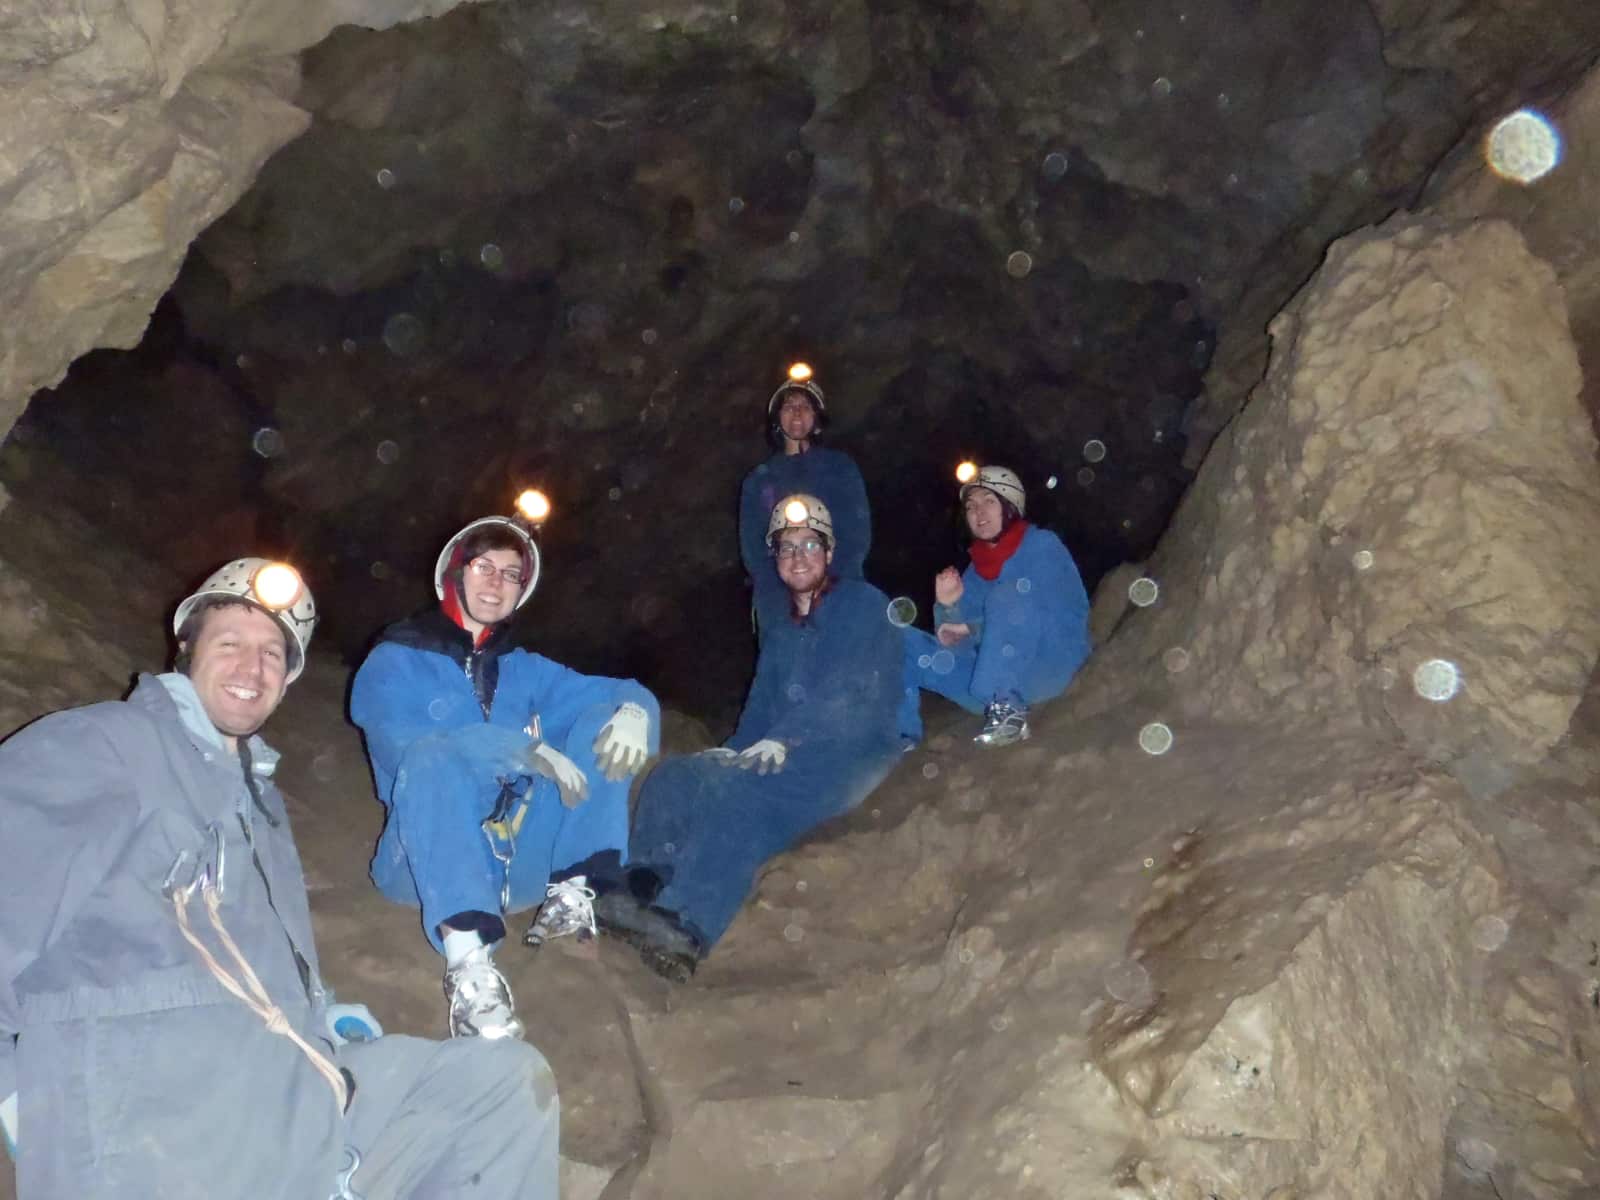 Group of people in blue coveralls sitting in cave